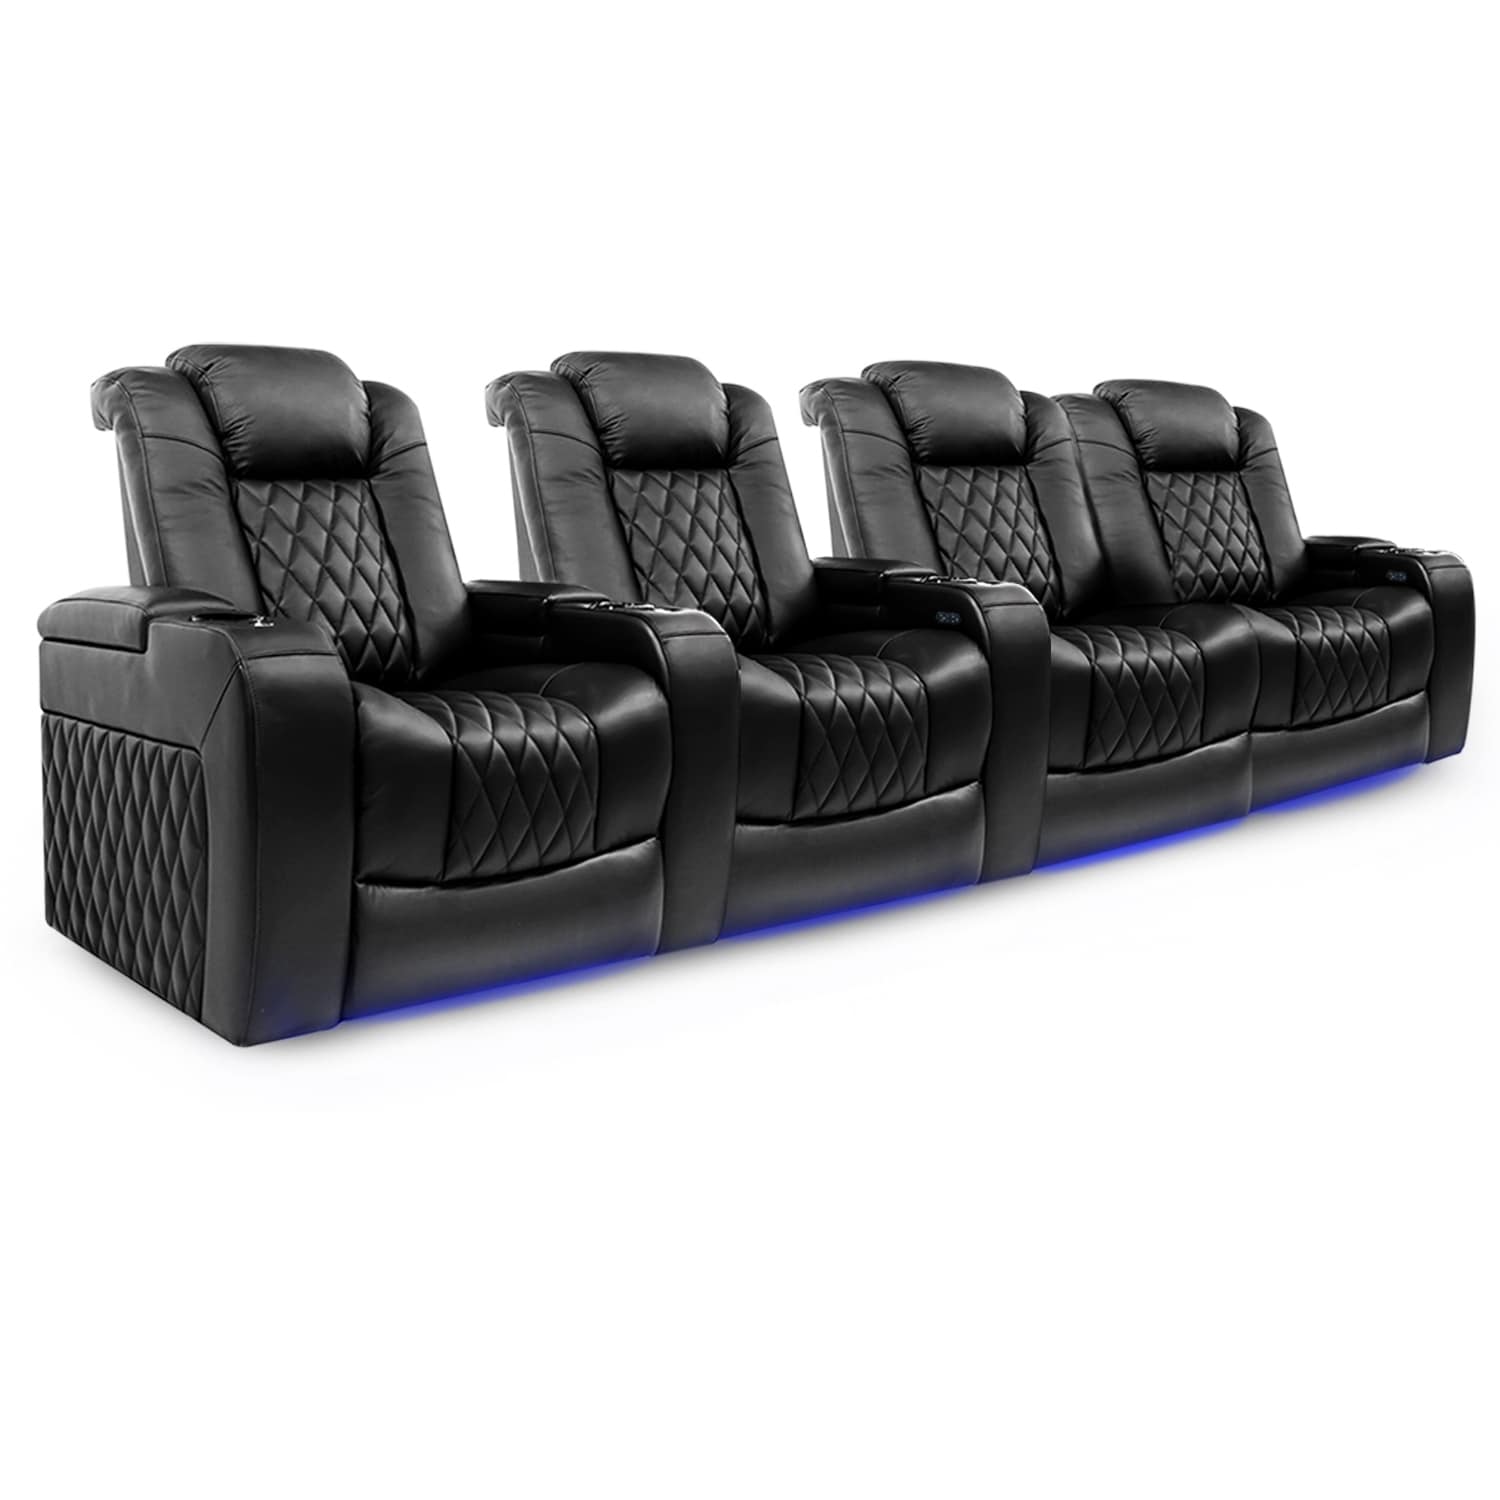 Valencia Tuscany Top Grain Nappa 11000 Leather Home Theater Seating Power Recliner Row Of 4 Loveseat Right Black